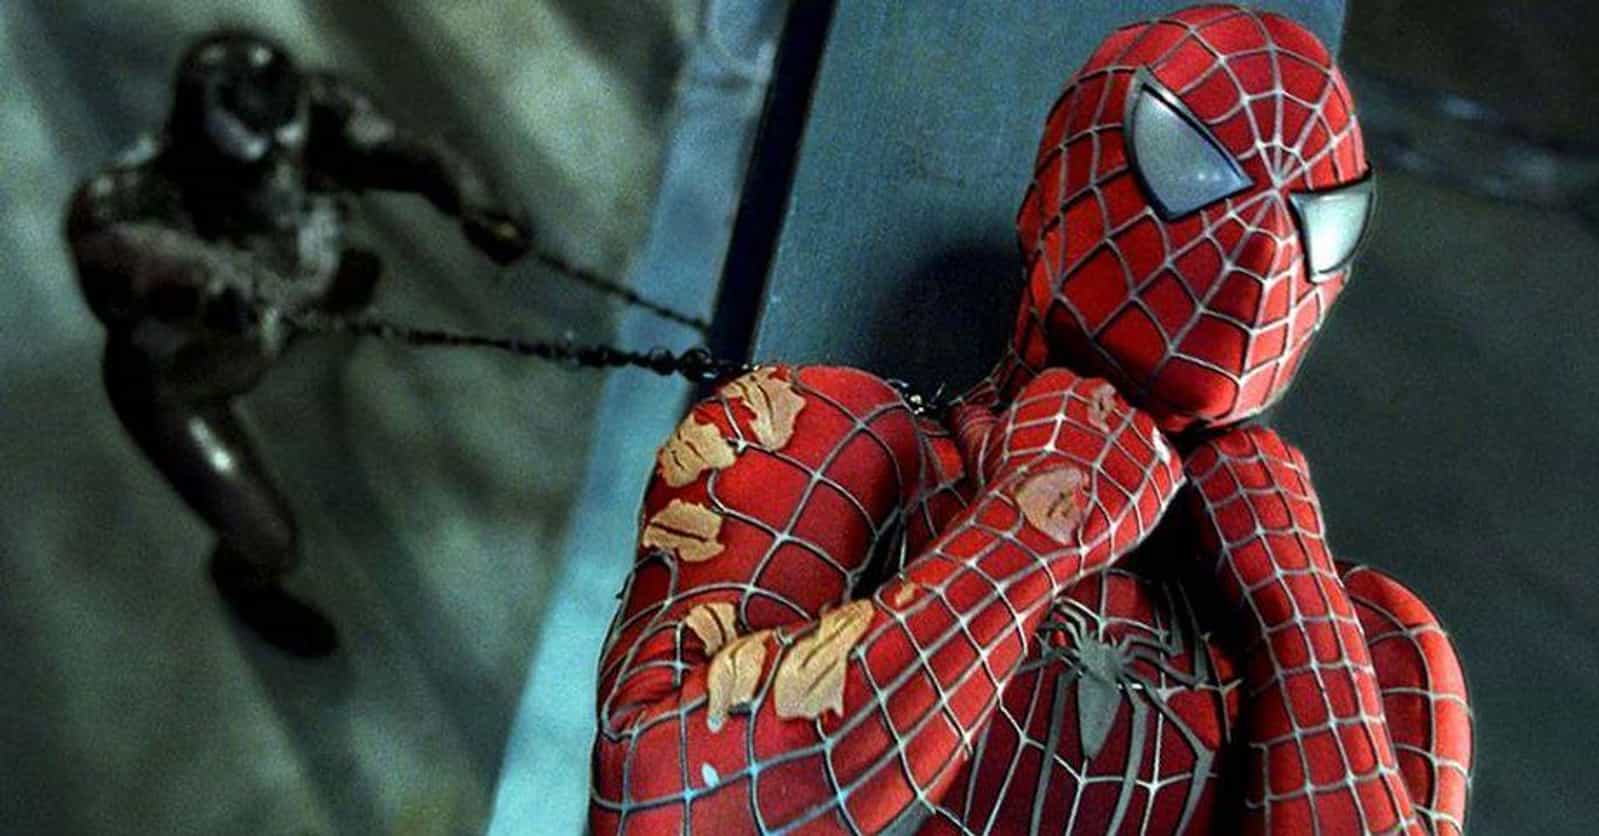 Behind The Scenes Of What Made 'Spider-Man 3' Such A Creative Flop